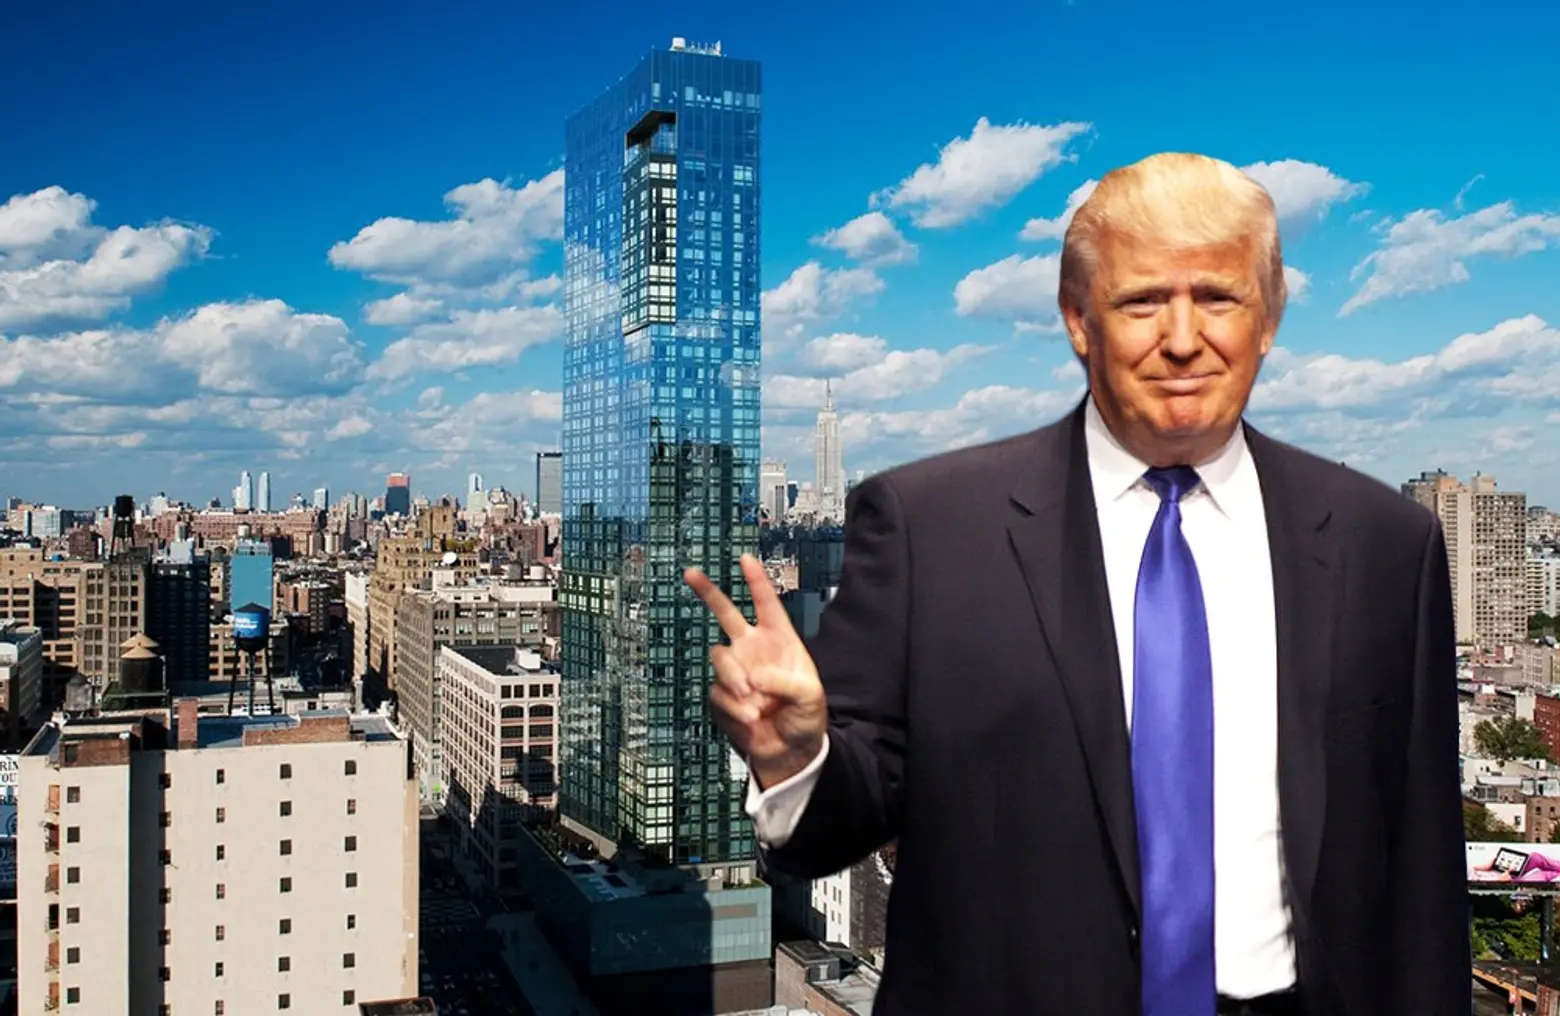 In the middle of the night, Trump Soho gets rebranded as the Dominick Hotel